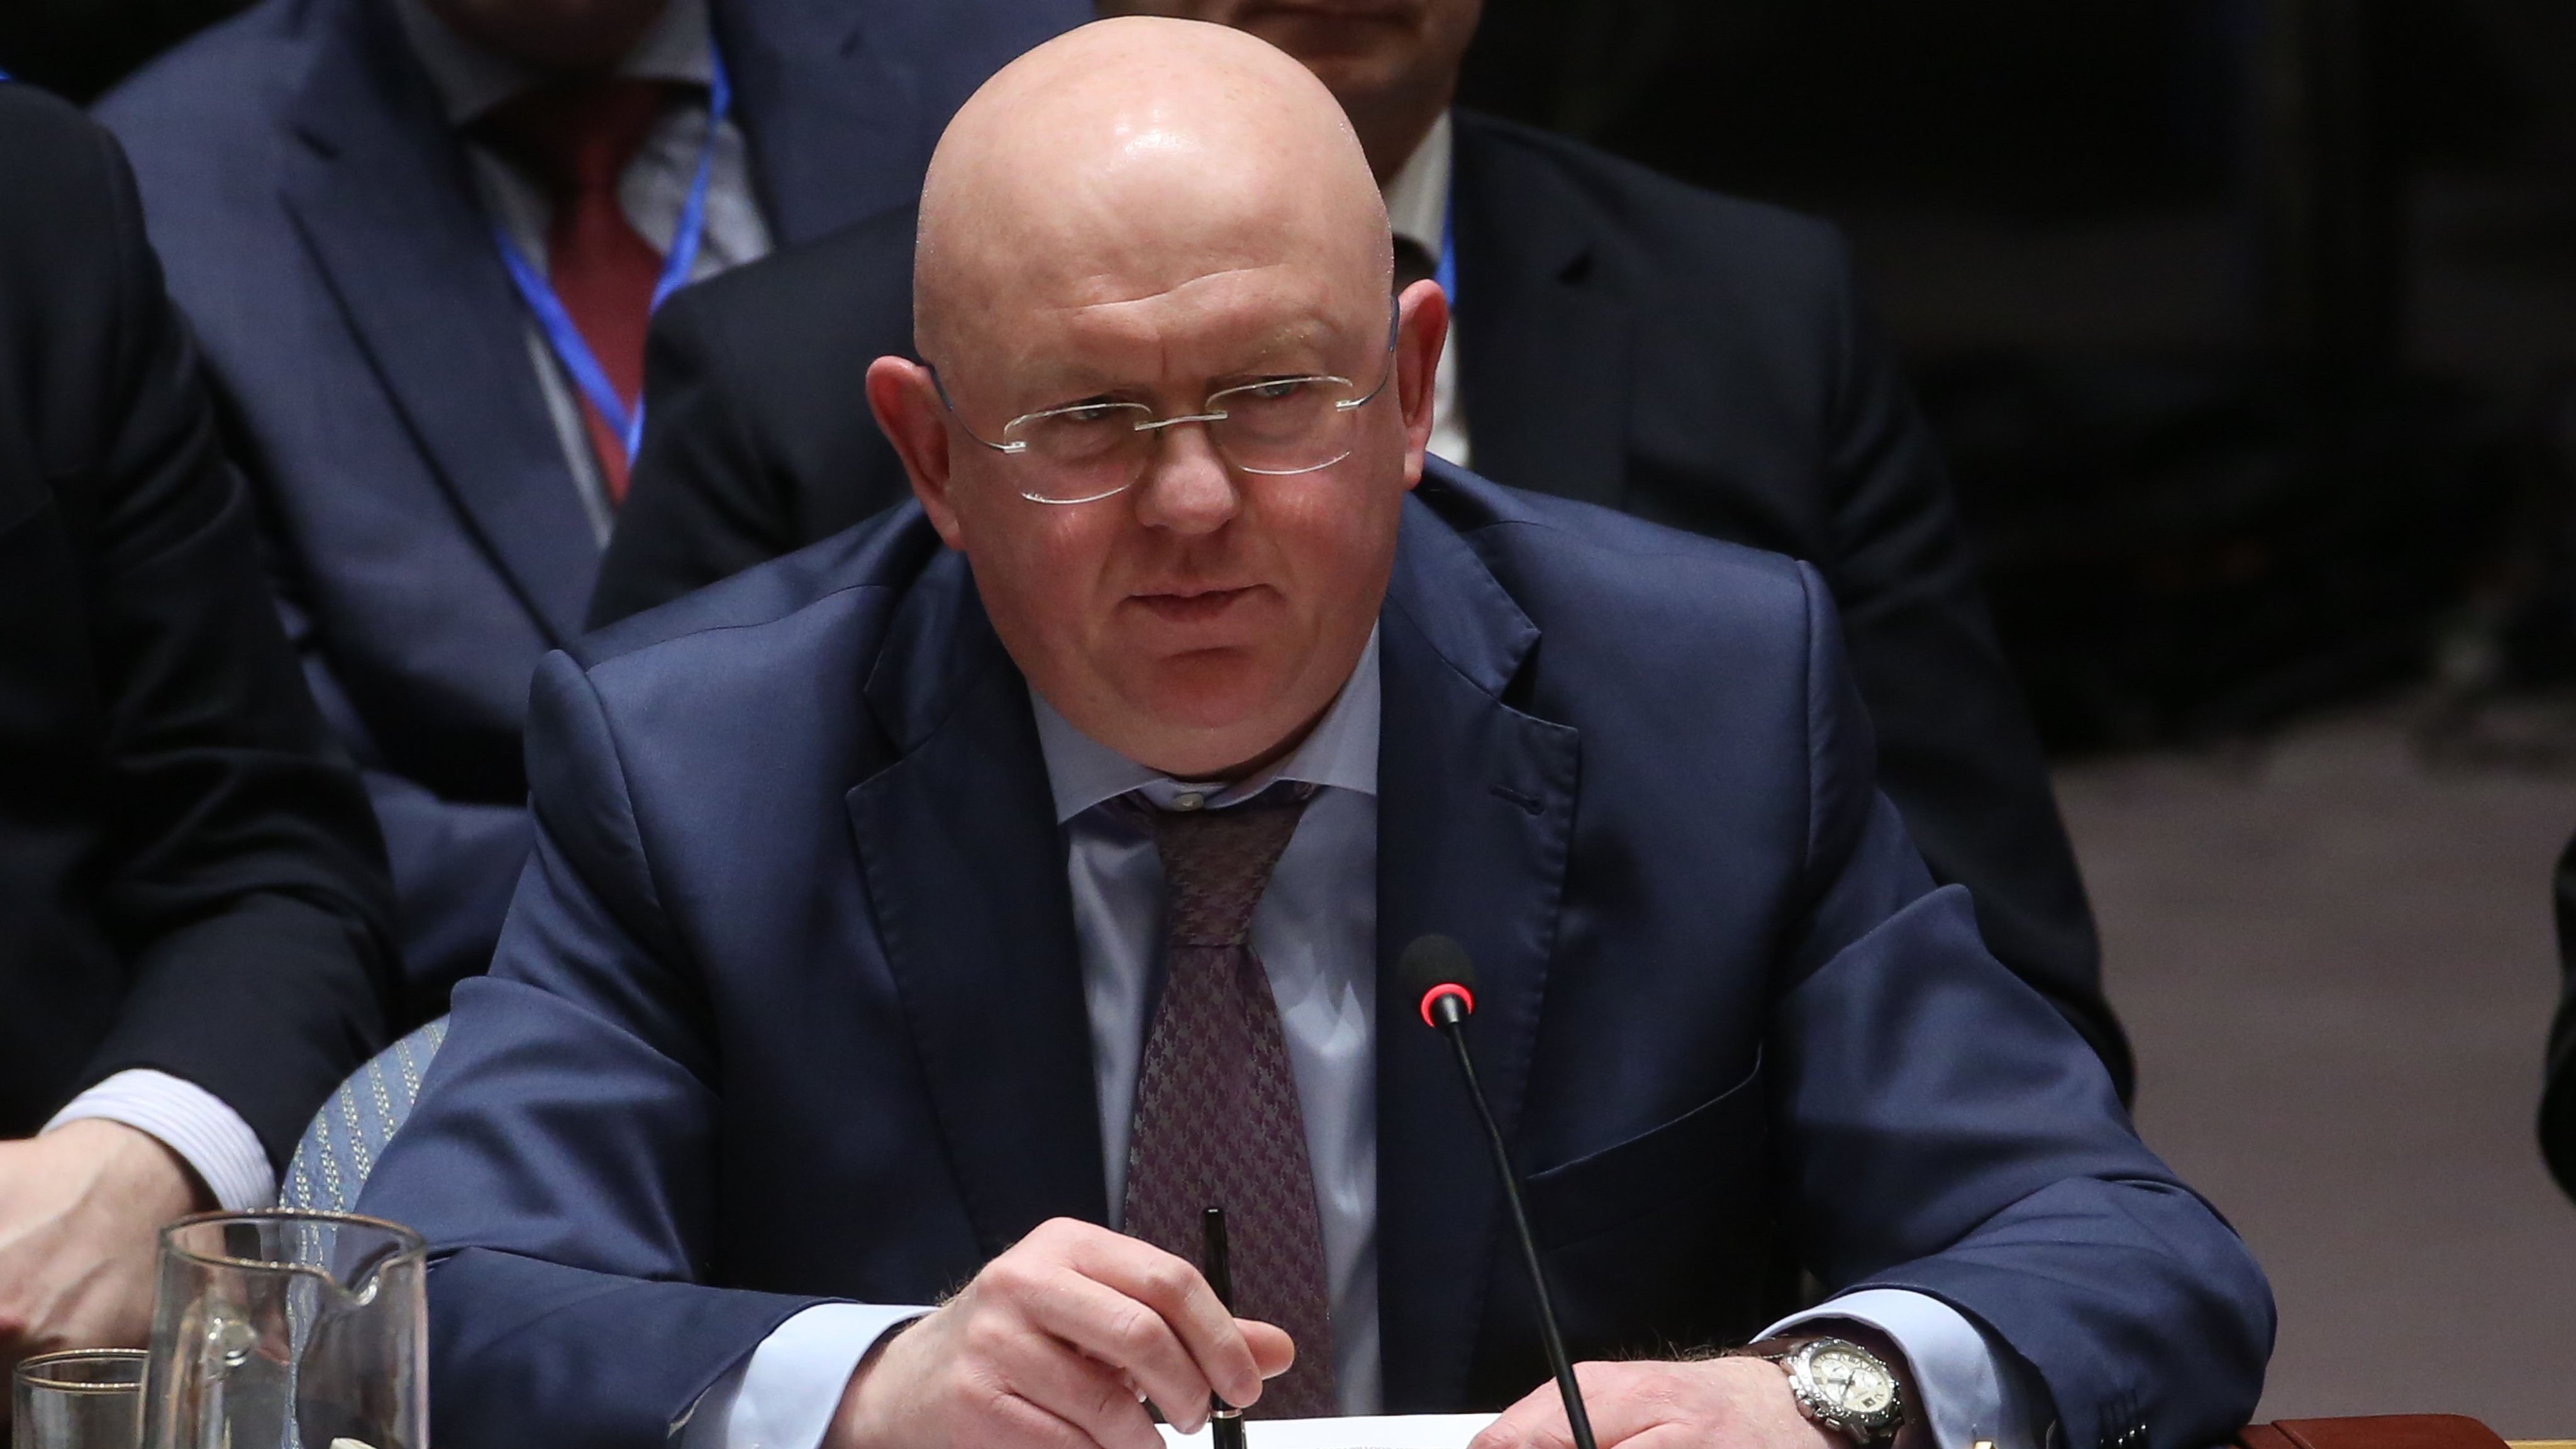 United Nations Security Council meeting on former Russian spy Sergei Skripal case